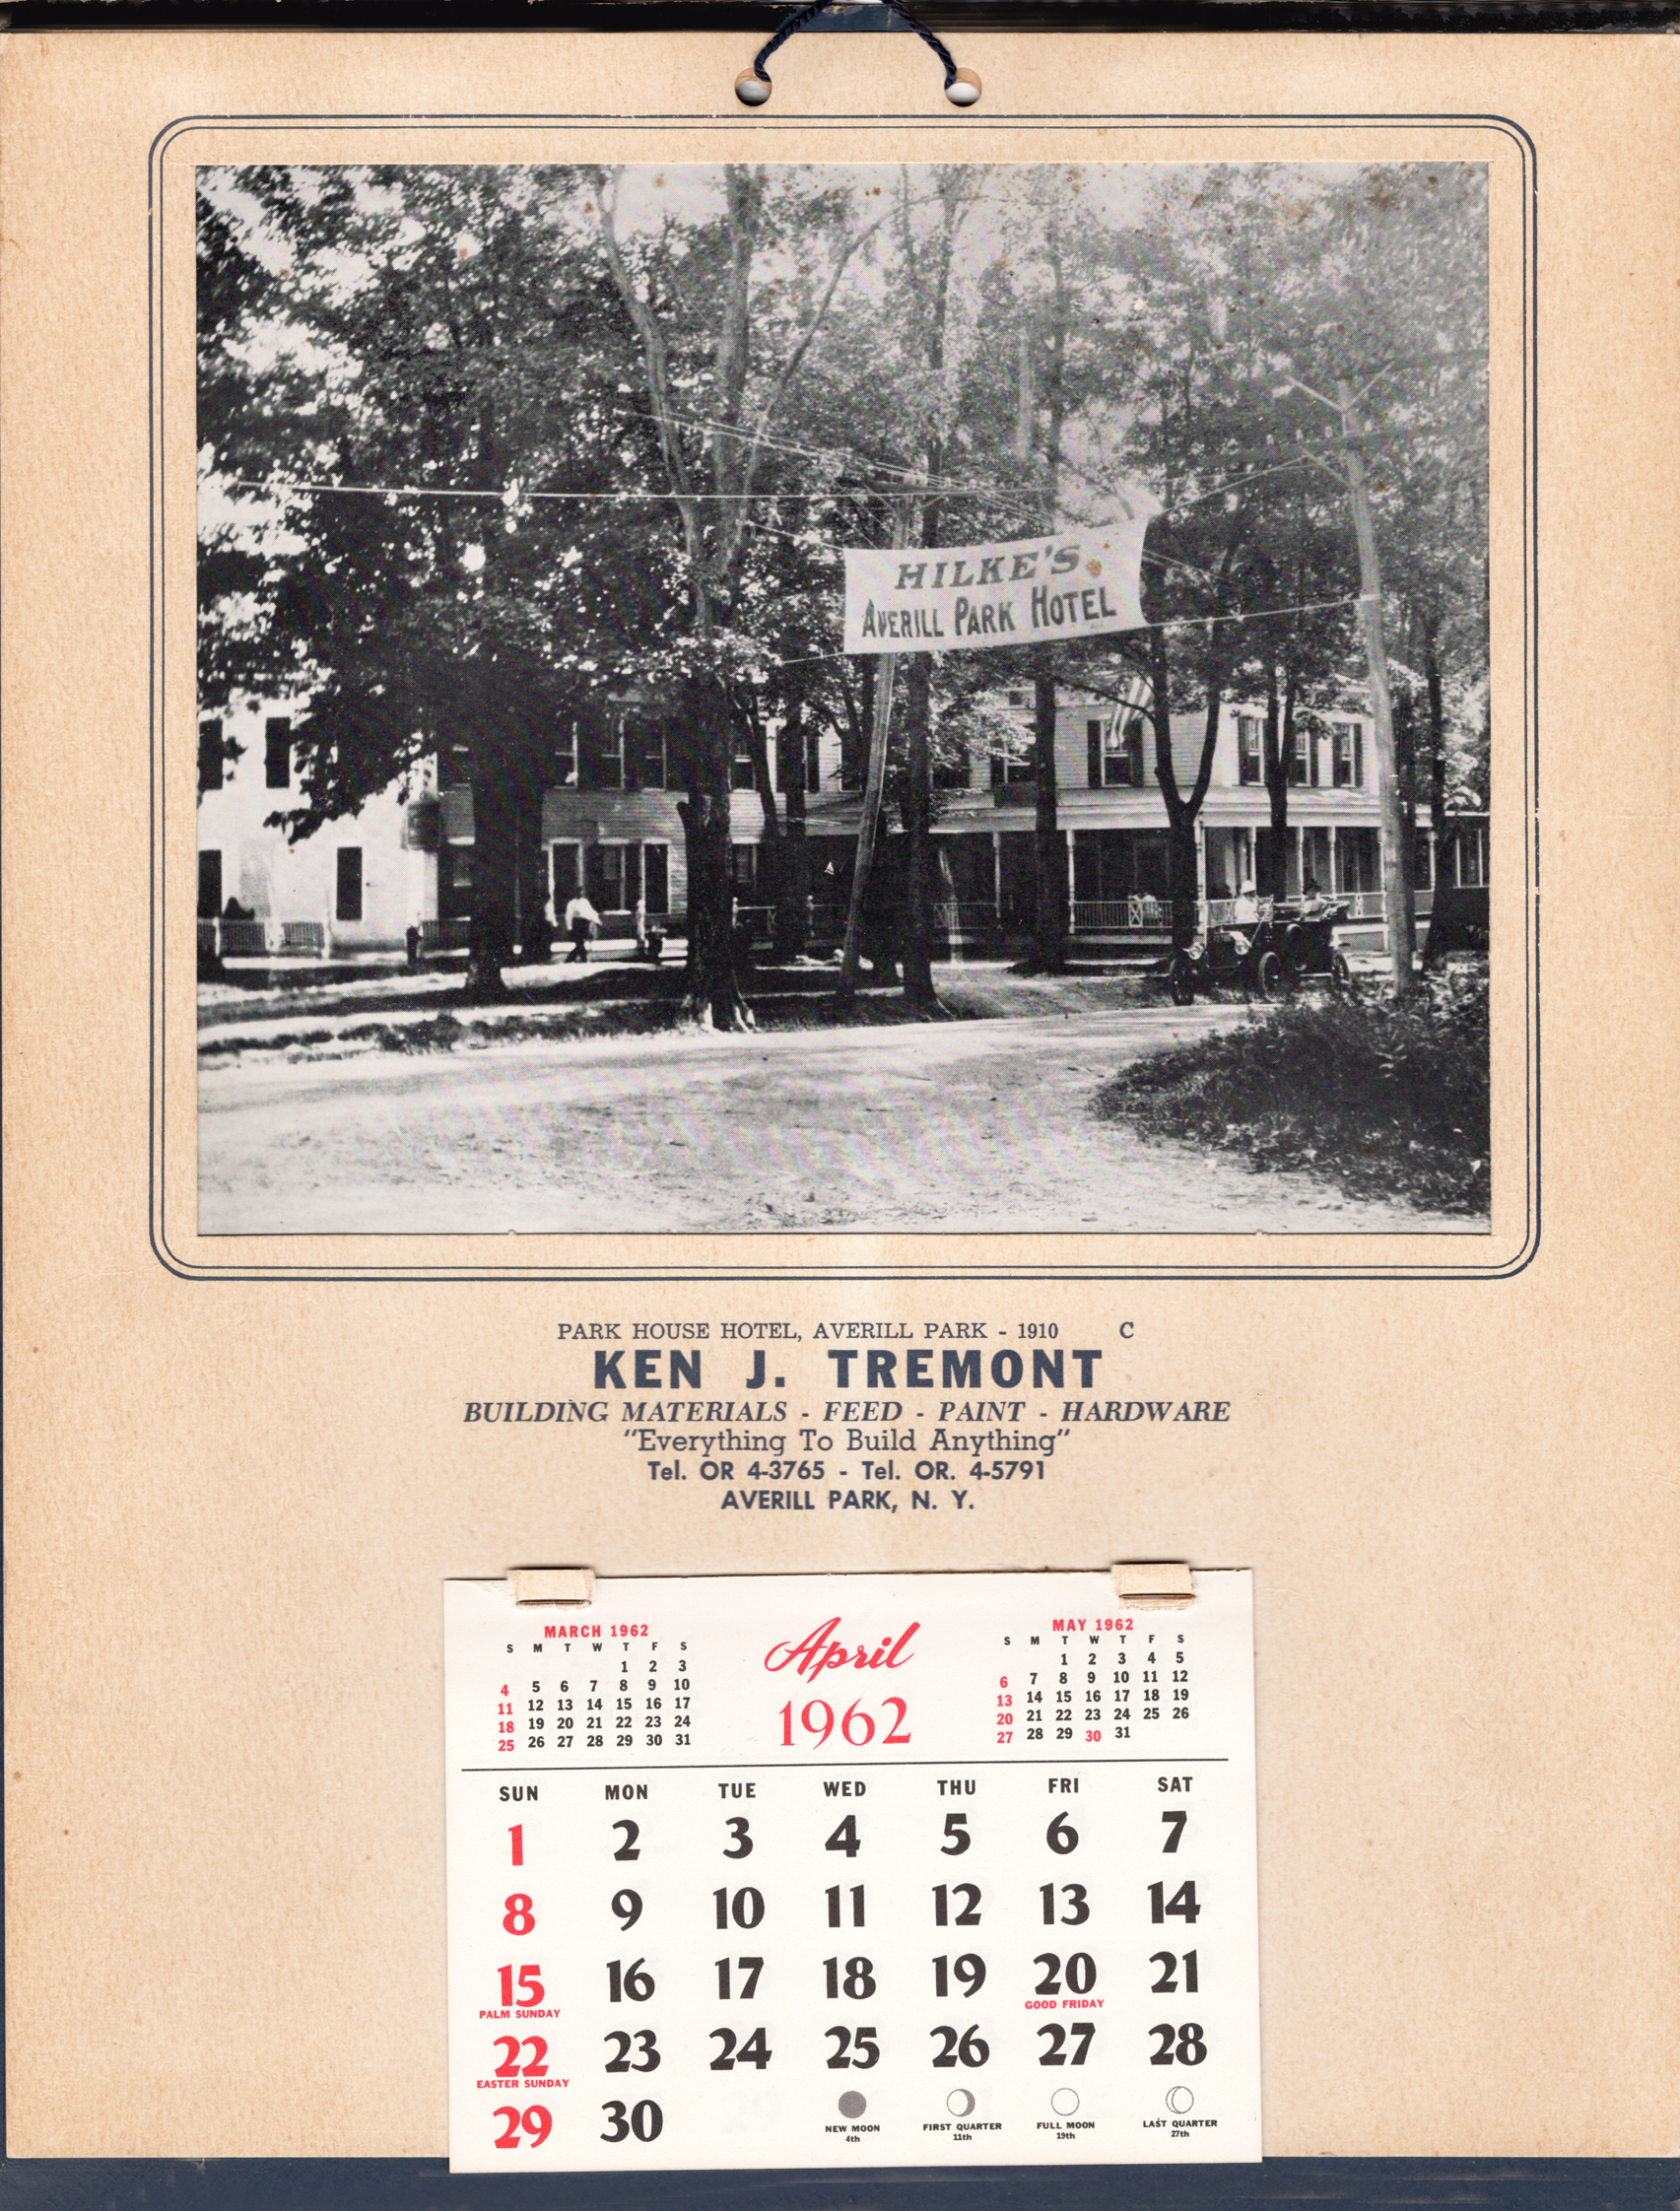 Tremont Lumber Company calendar from 1962.